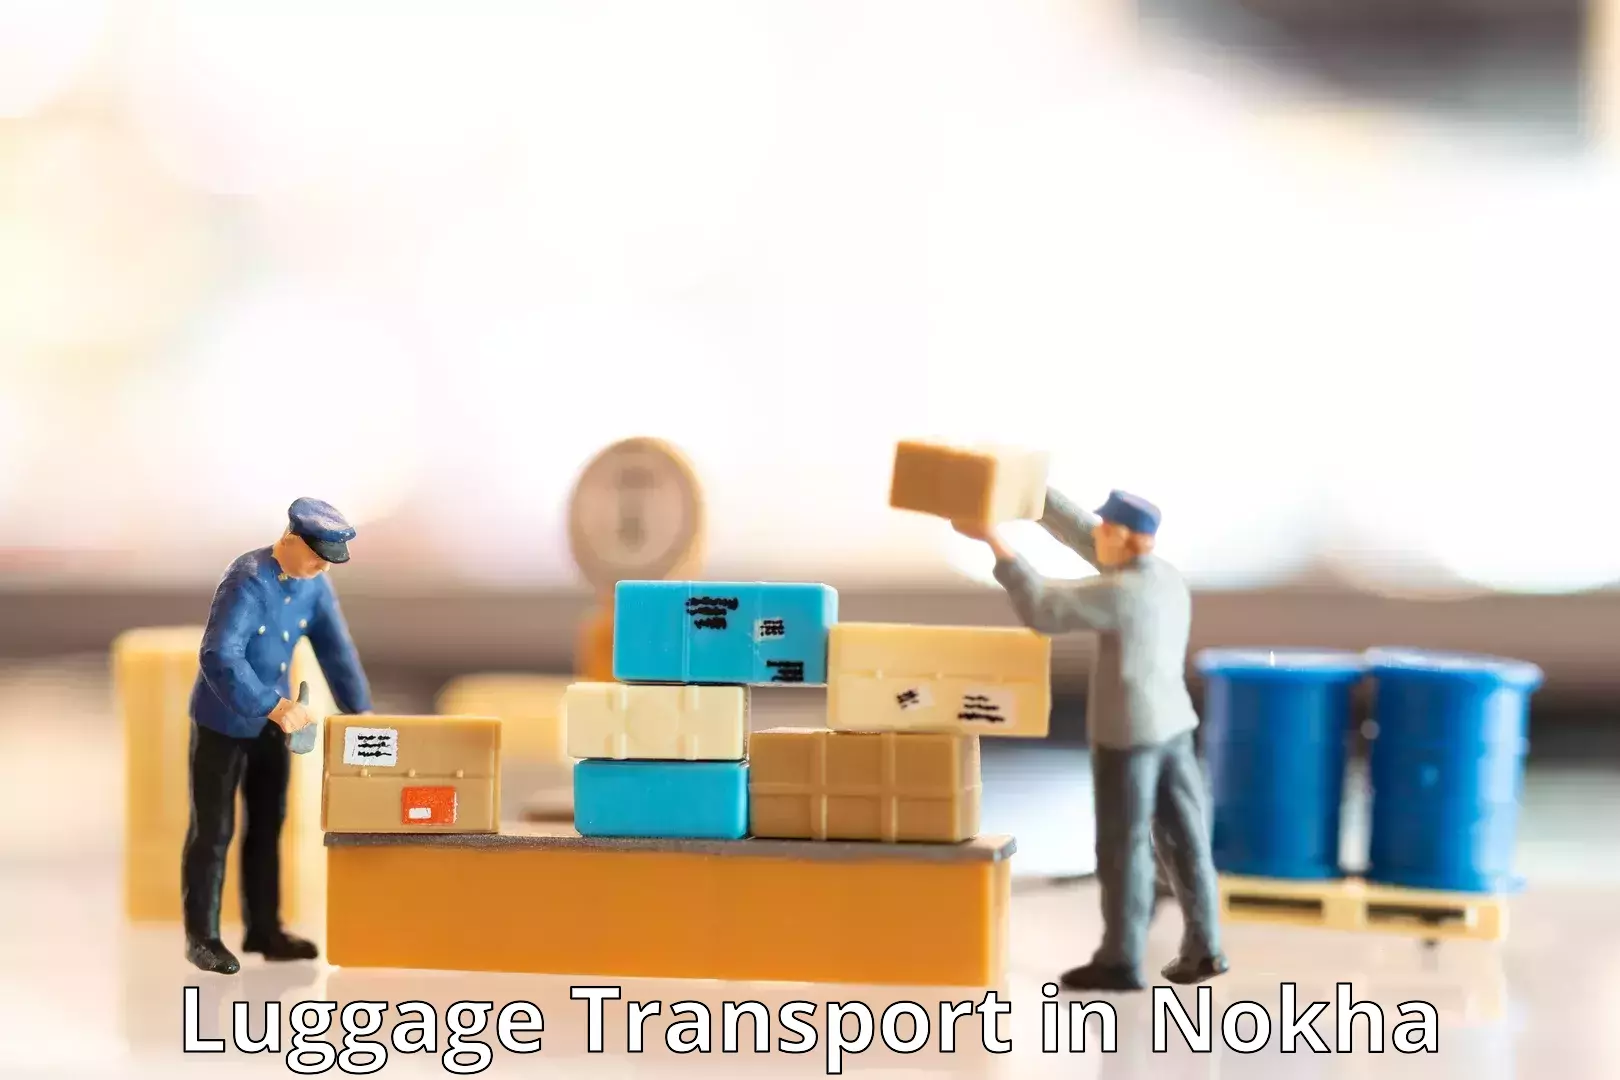 Luggage transport solutions in Nokha